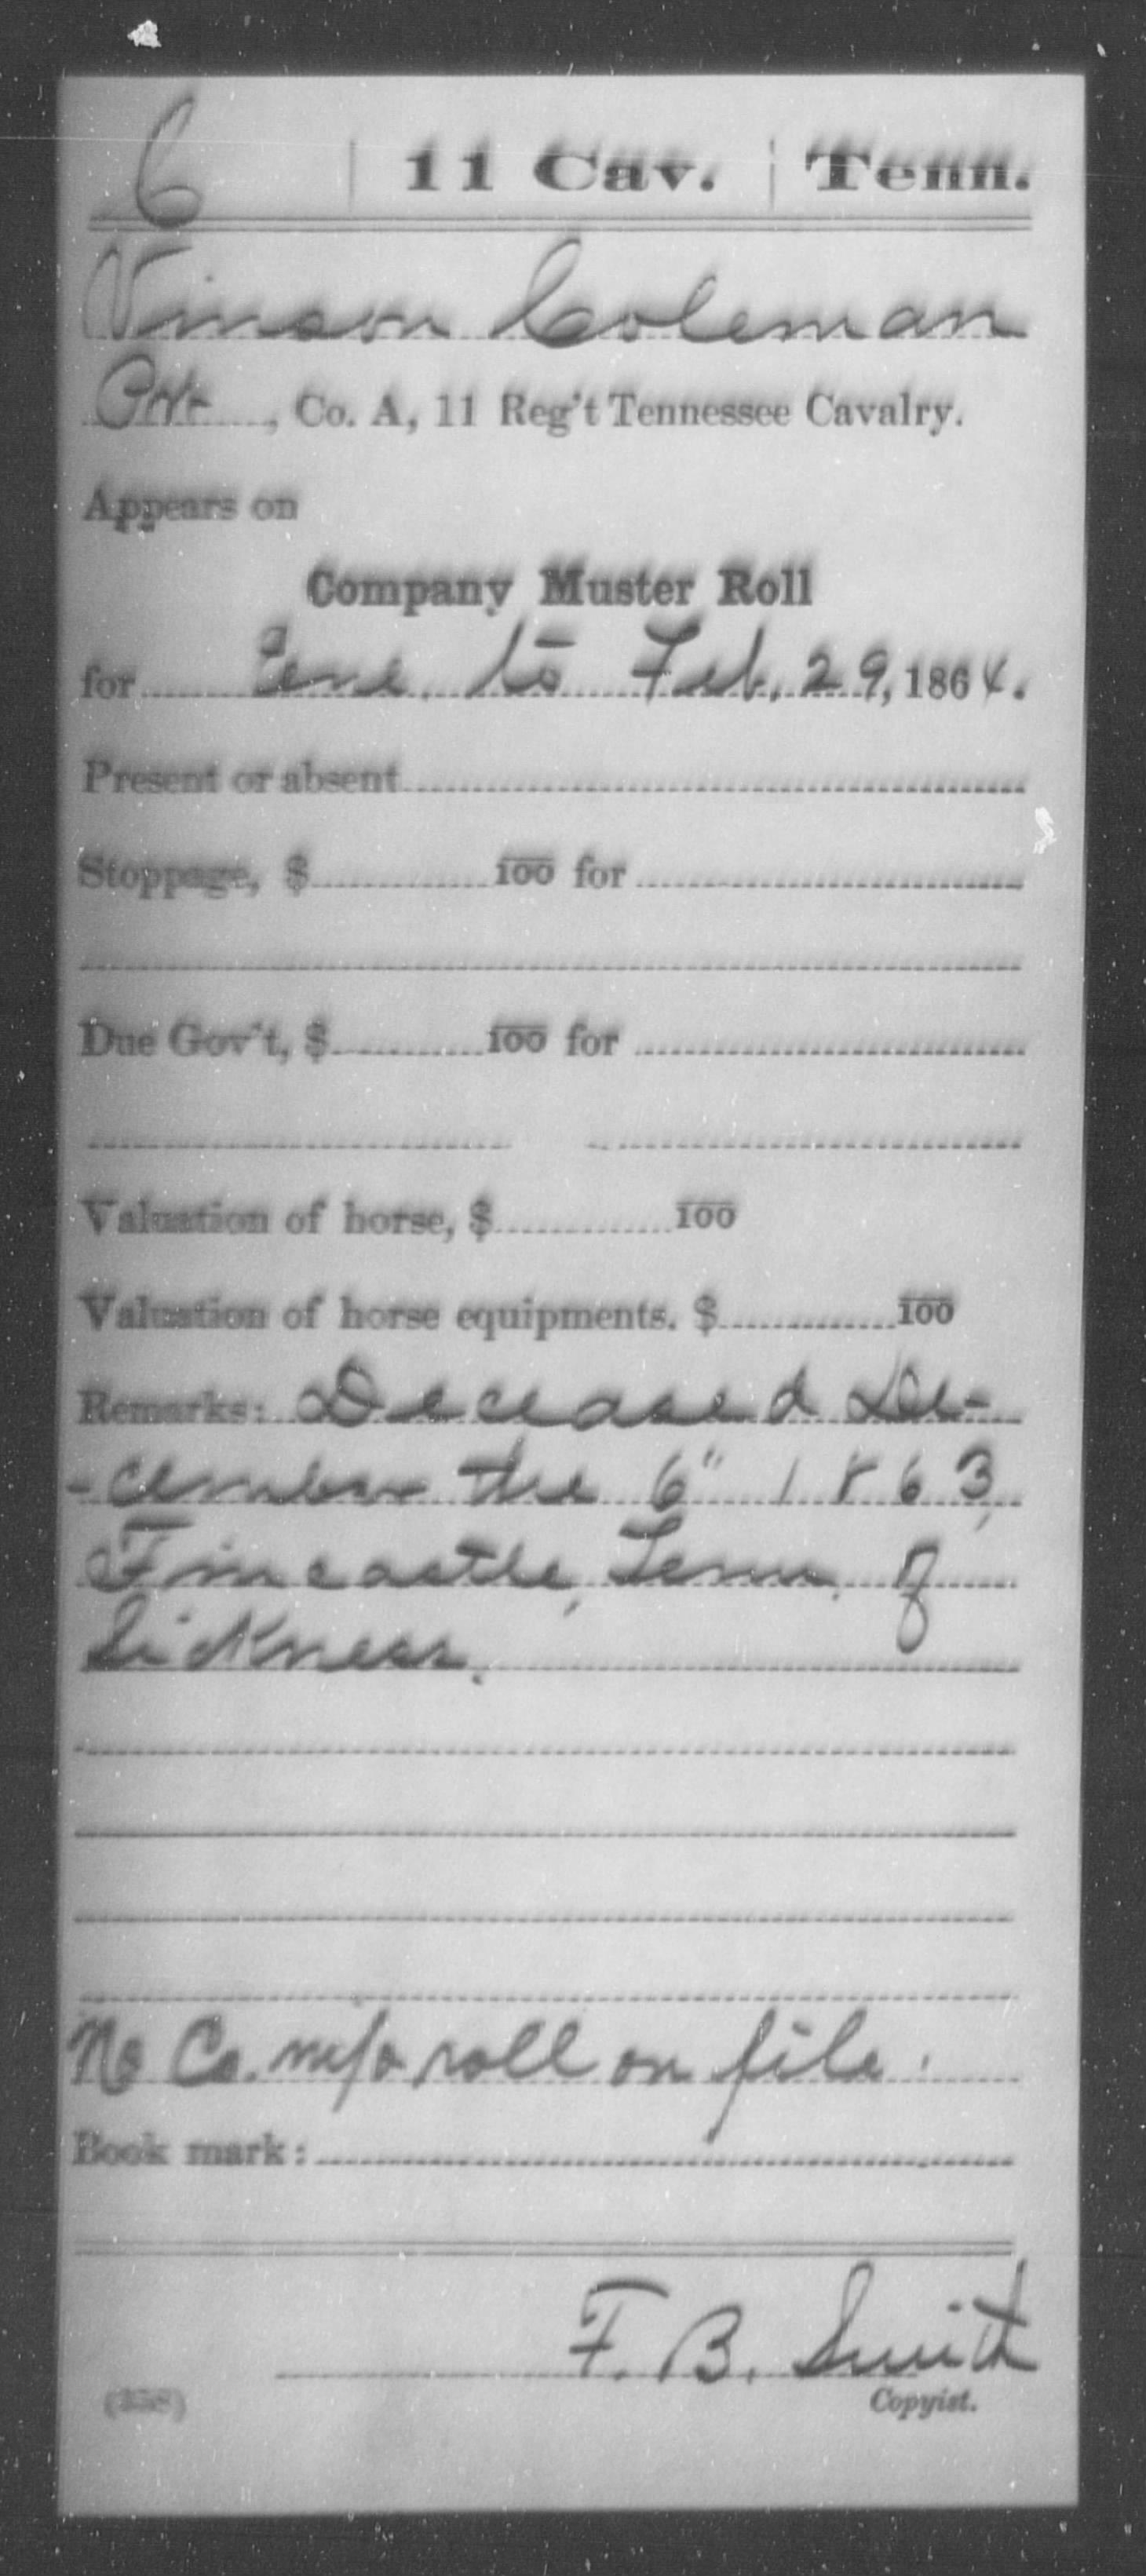 Vincent Coleman Muster Roll